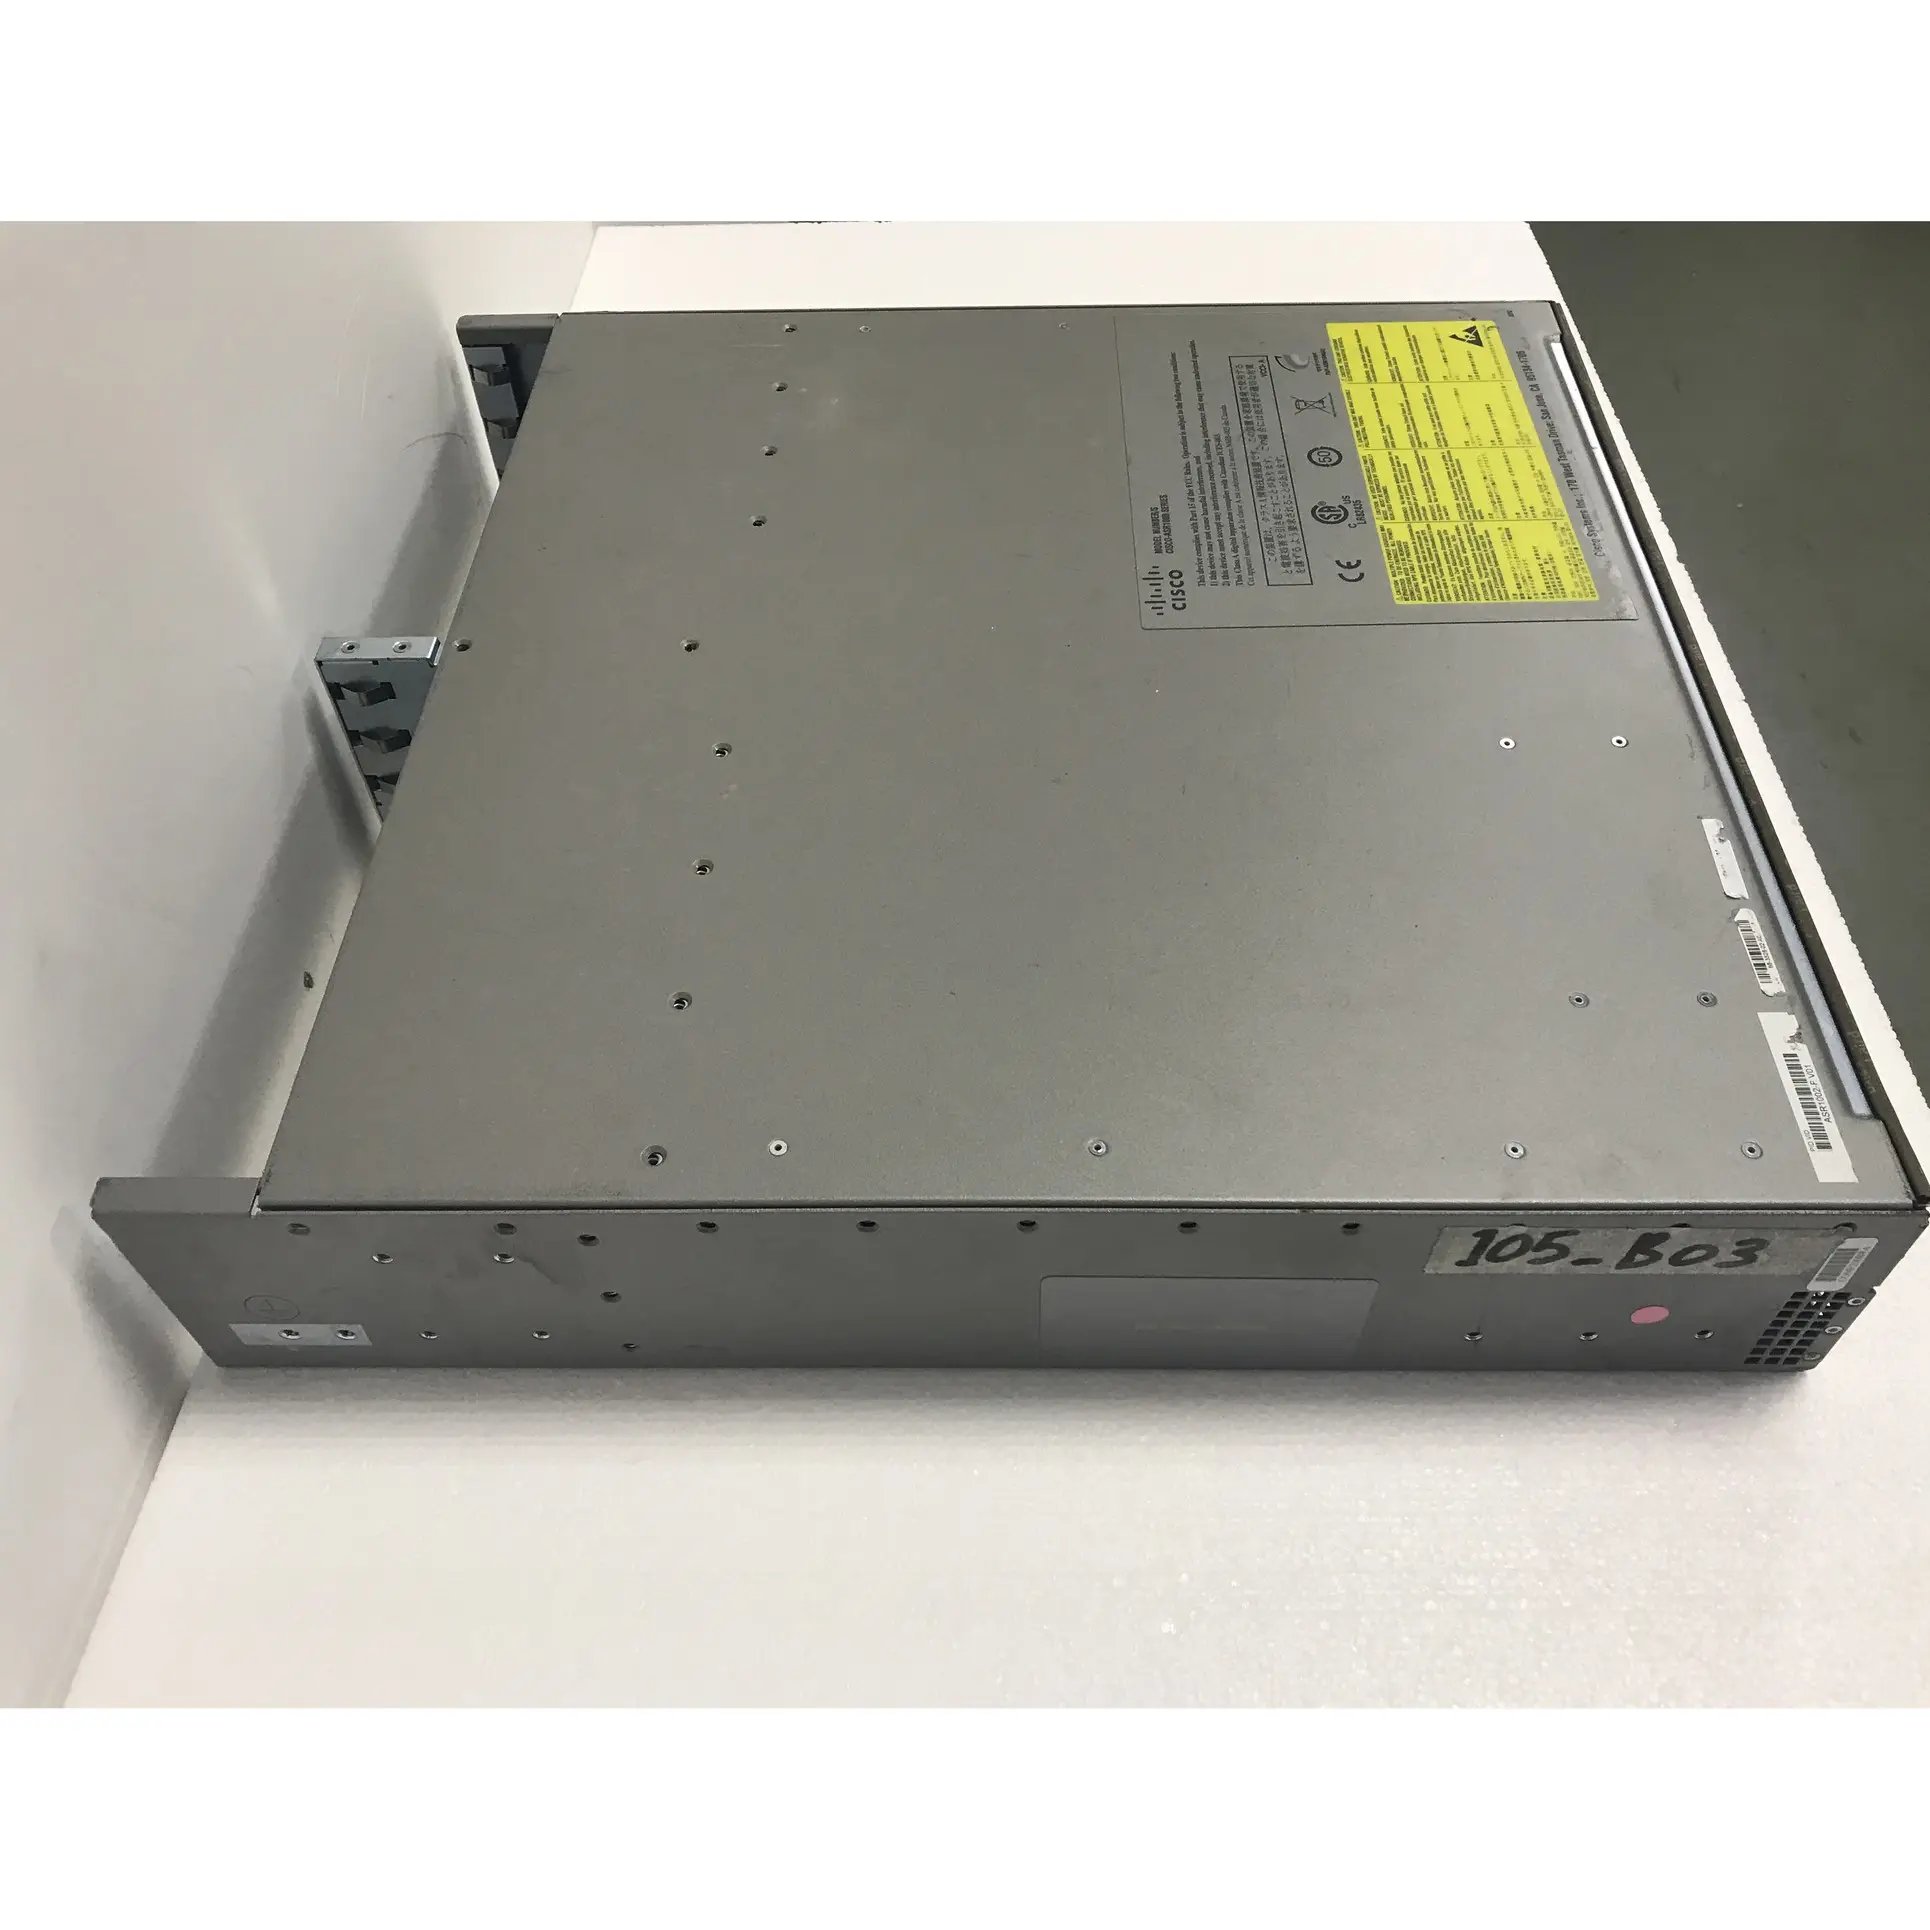 Used ASR1002-F router with ASR1000-ESP5 dual AC power supply in good condition ASR 1000 Series